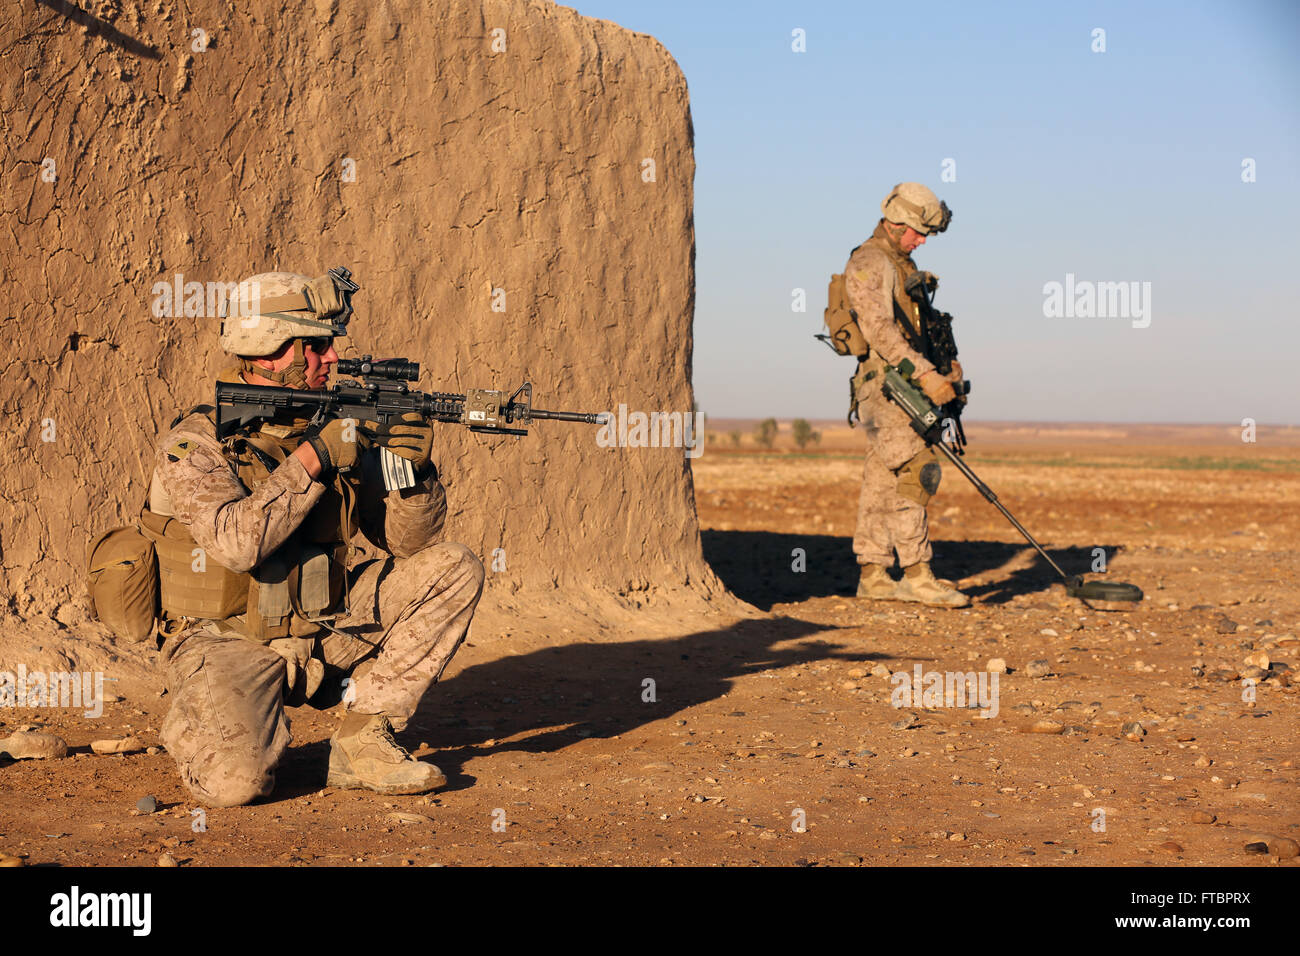 A U.S. Marine holds security as a fellow Marine sweeps for improvised explosive devices with a metal detector during a patrol mission January 15, 2014 near Spin Boldak, Afghanistan. Stock Photo